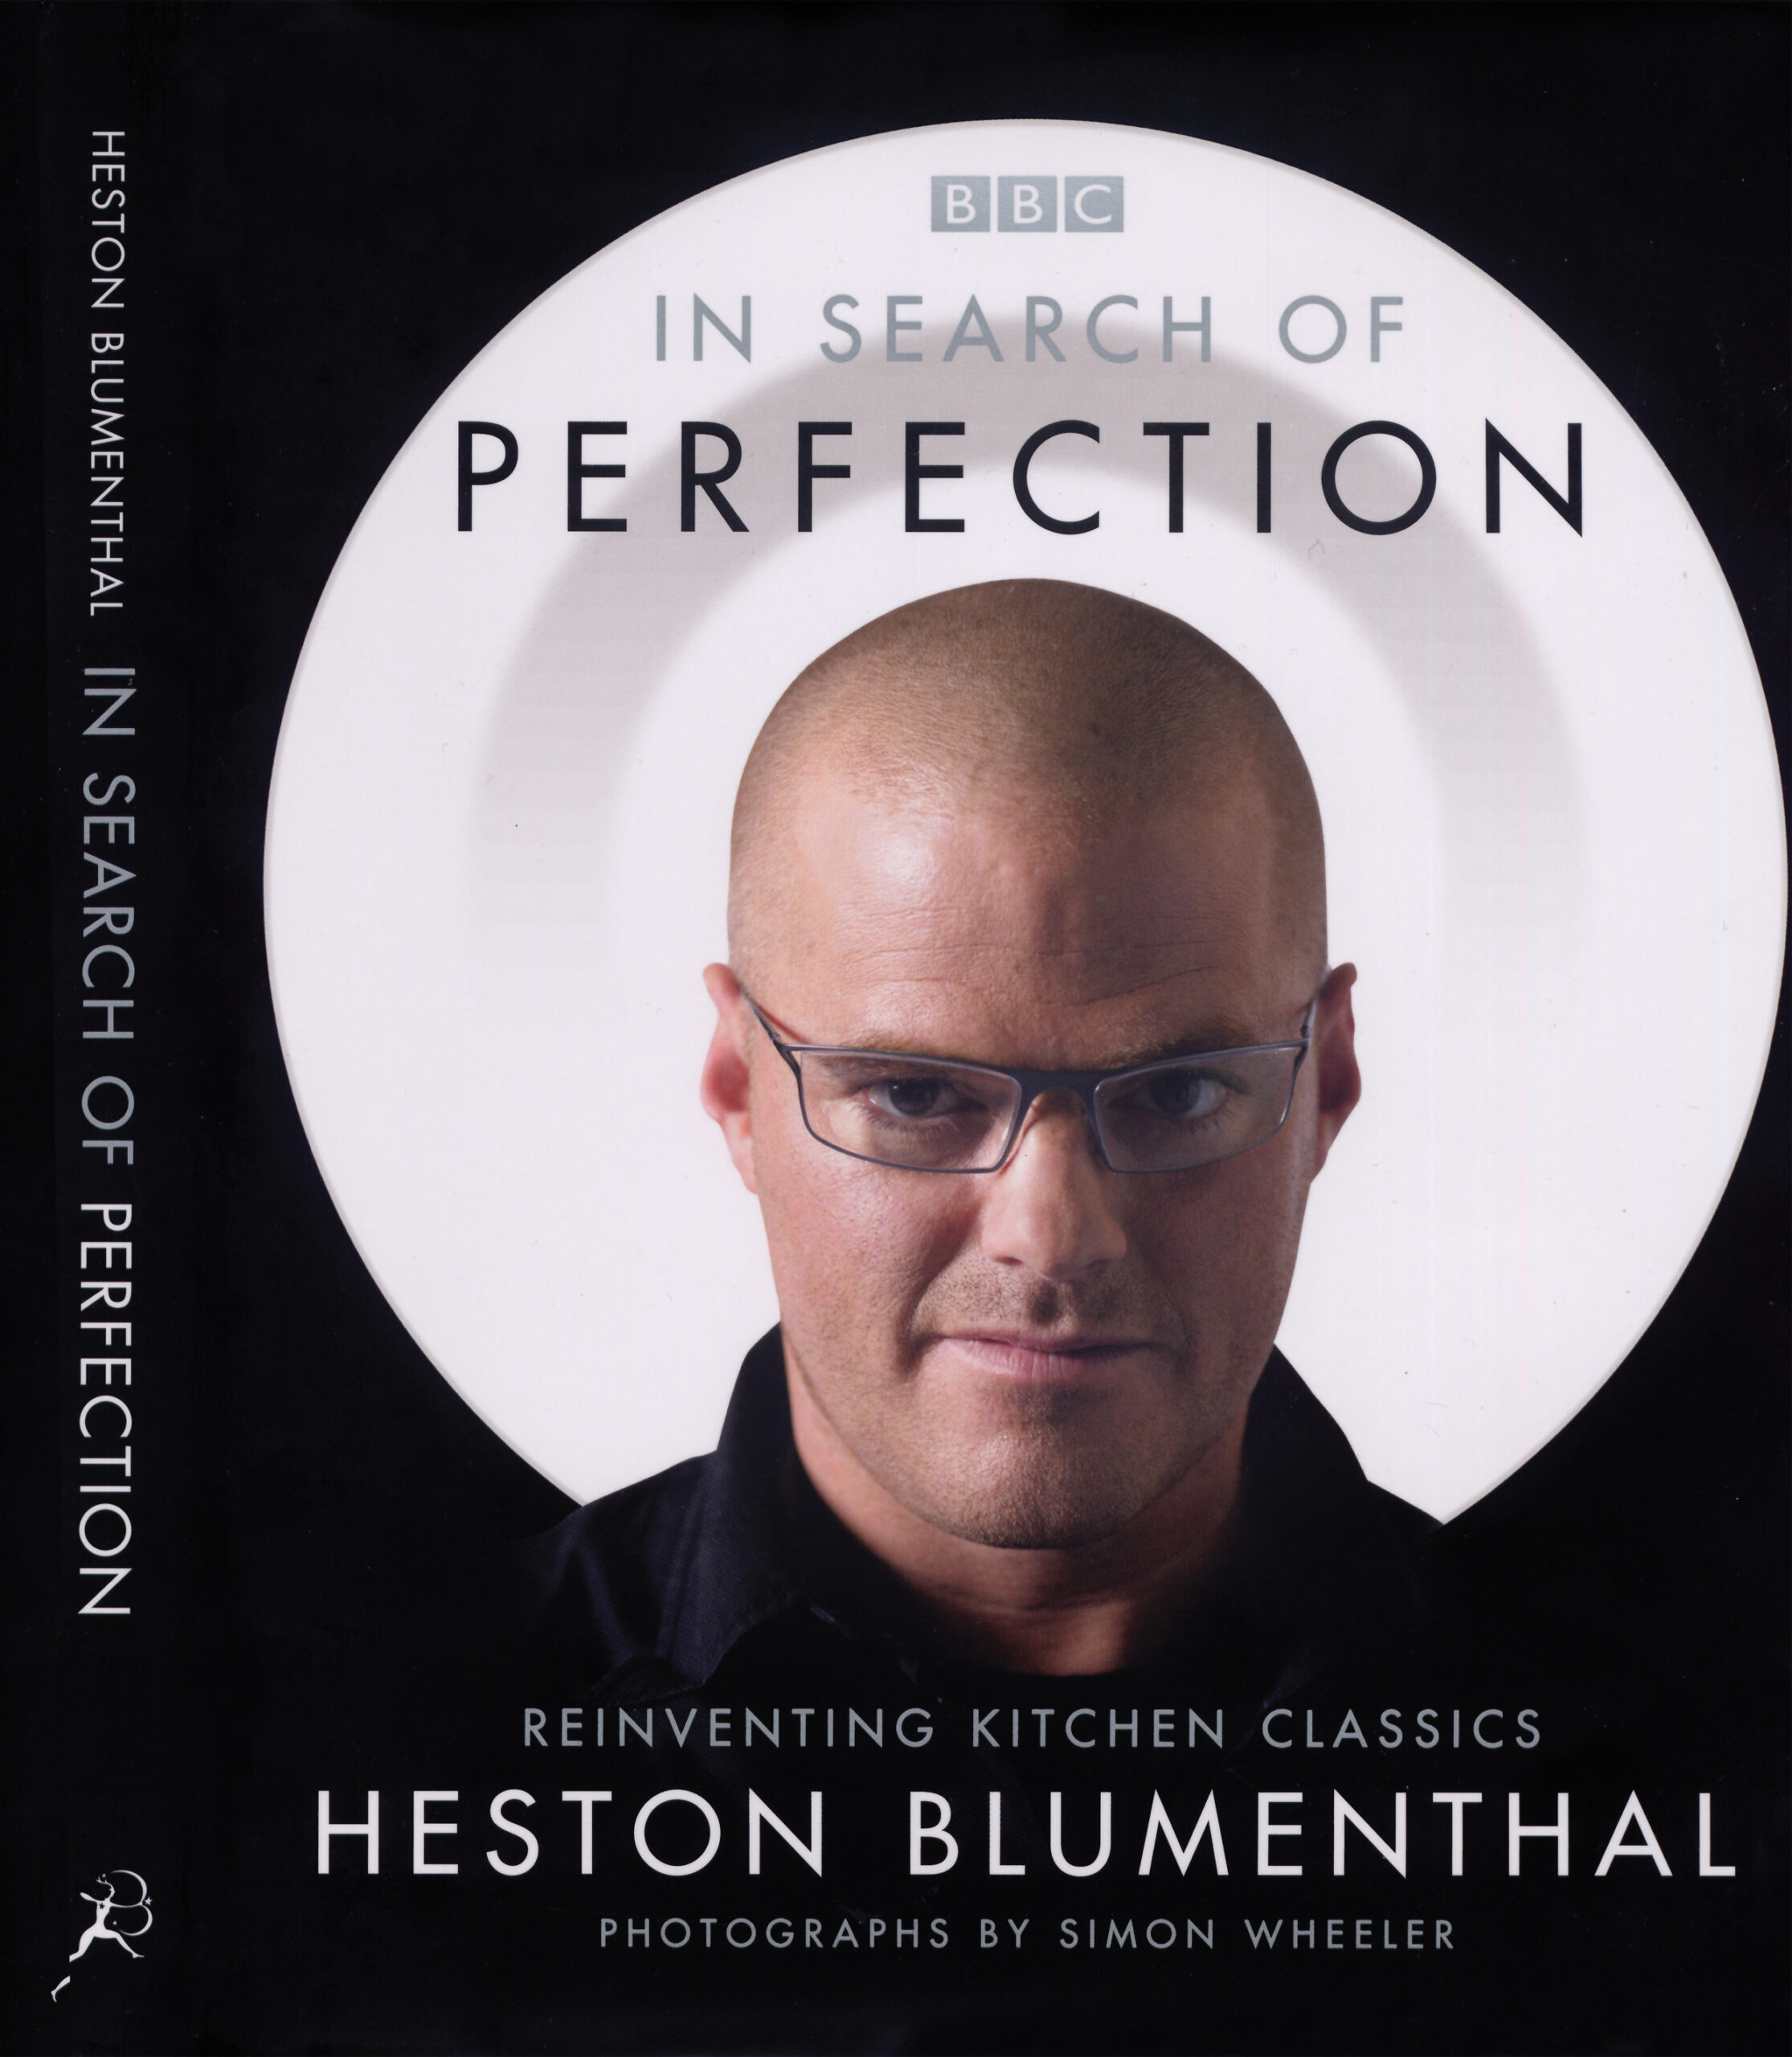 In Search of perfection – Heston Blumenthal (estratto)